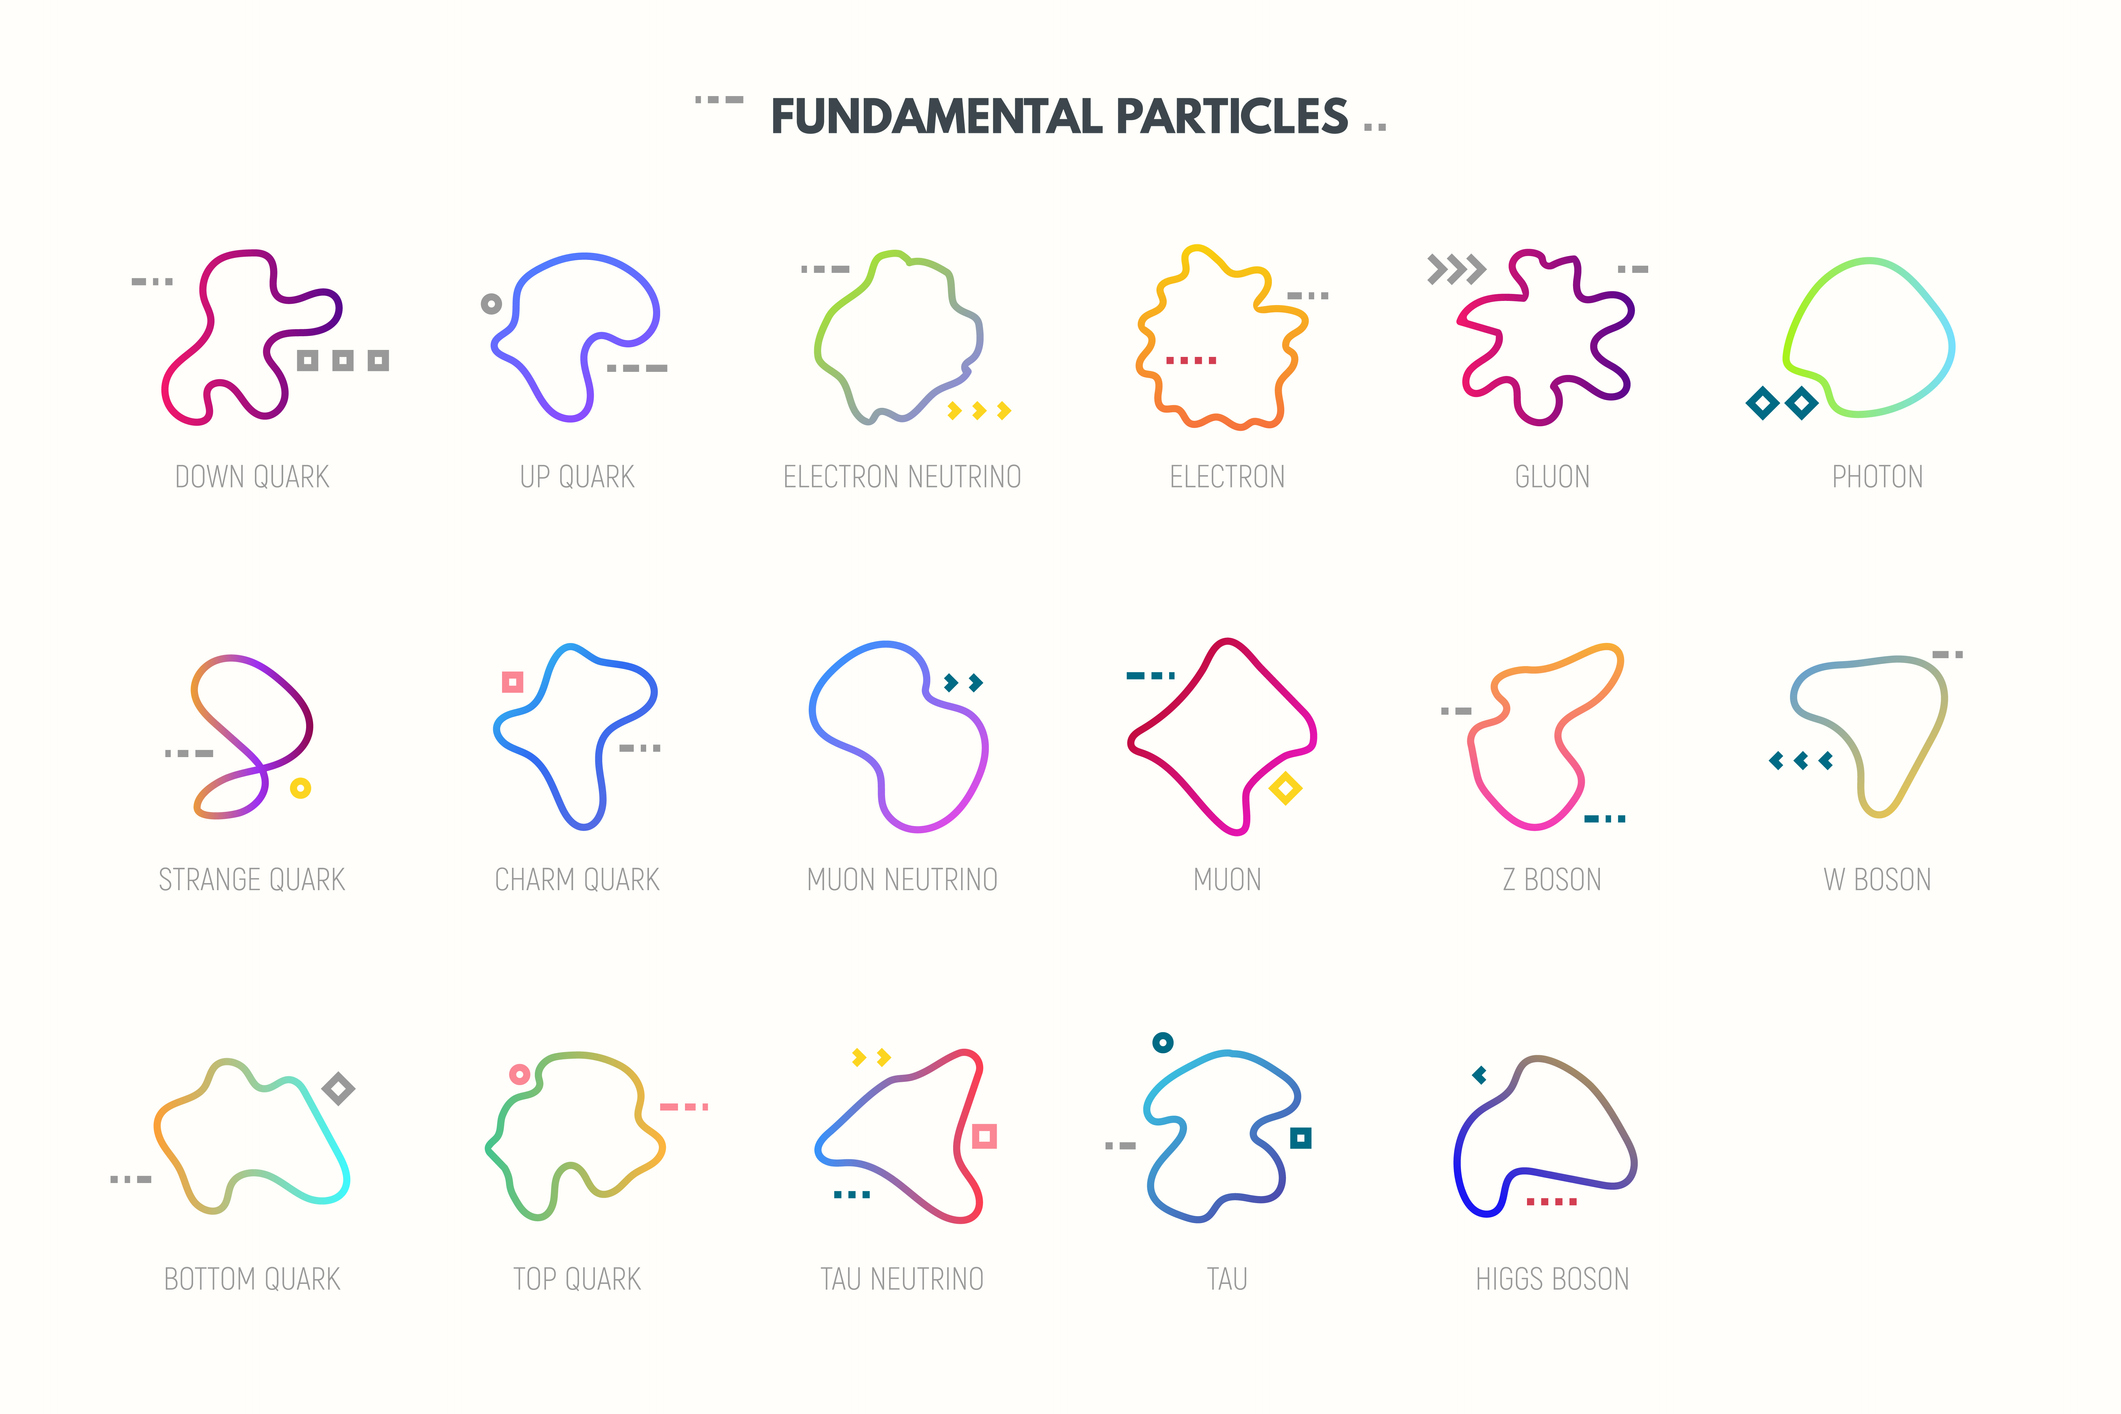 An illustration depicting each of the 17 fundamental particles.